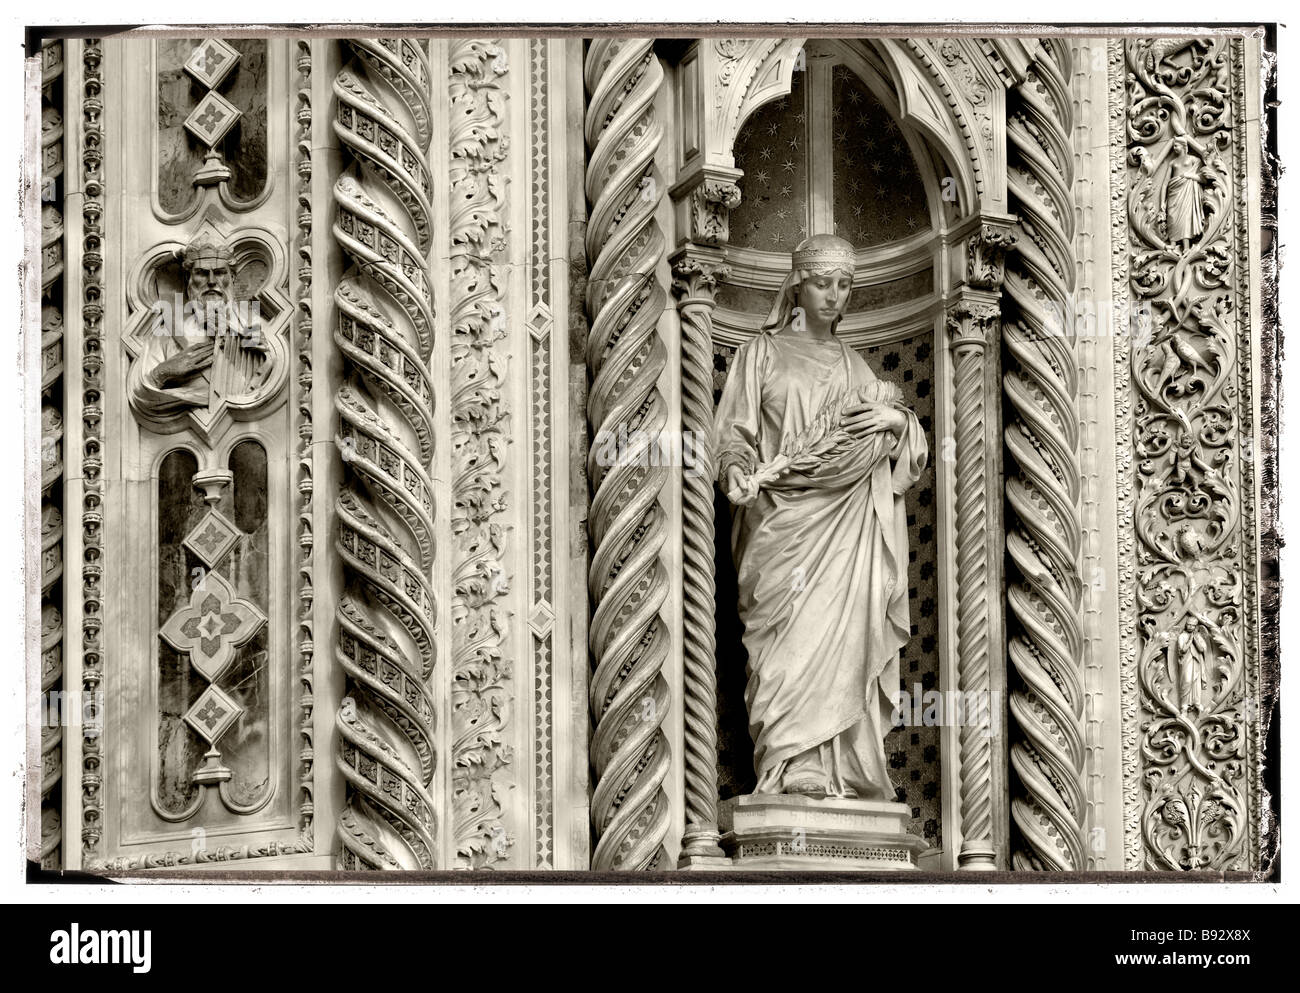 Statue Of Saint Mary Of The Flowers on the facade of Florence Duomo (Cattedrale di Santa Maria del Fiore , Florence Italy Stock Photo